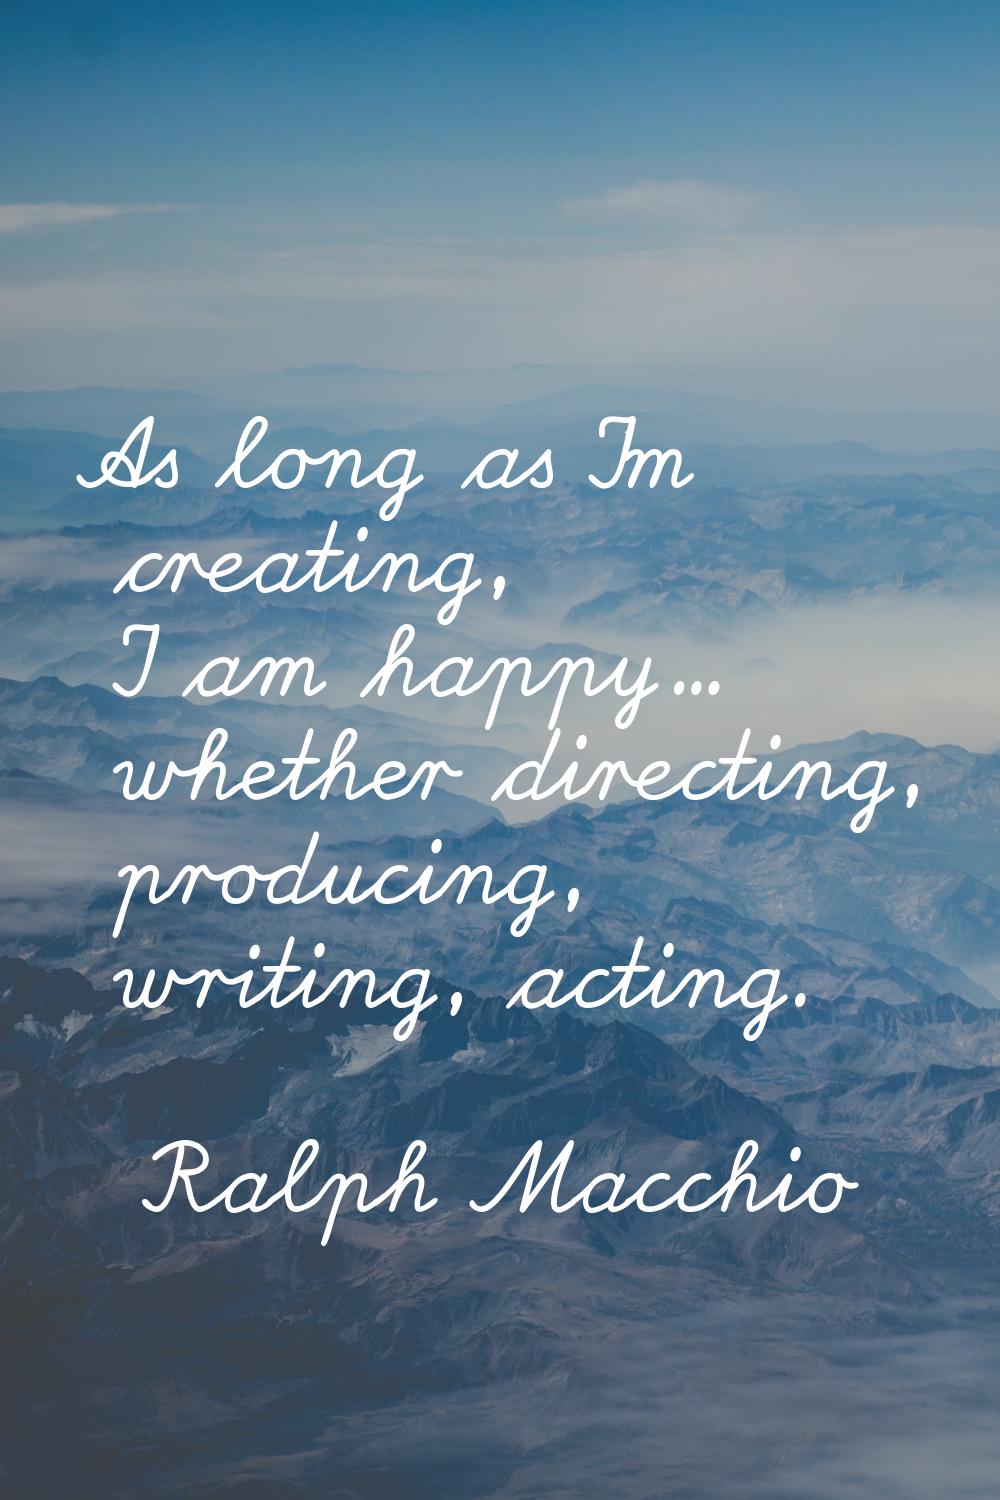 As long as I'm creating, I am happy... whether directing, producing, writing, acting.